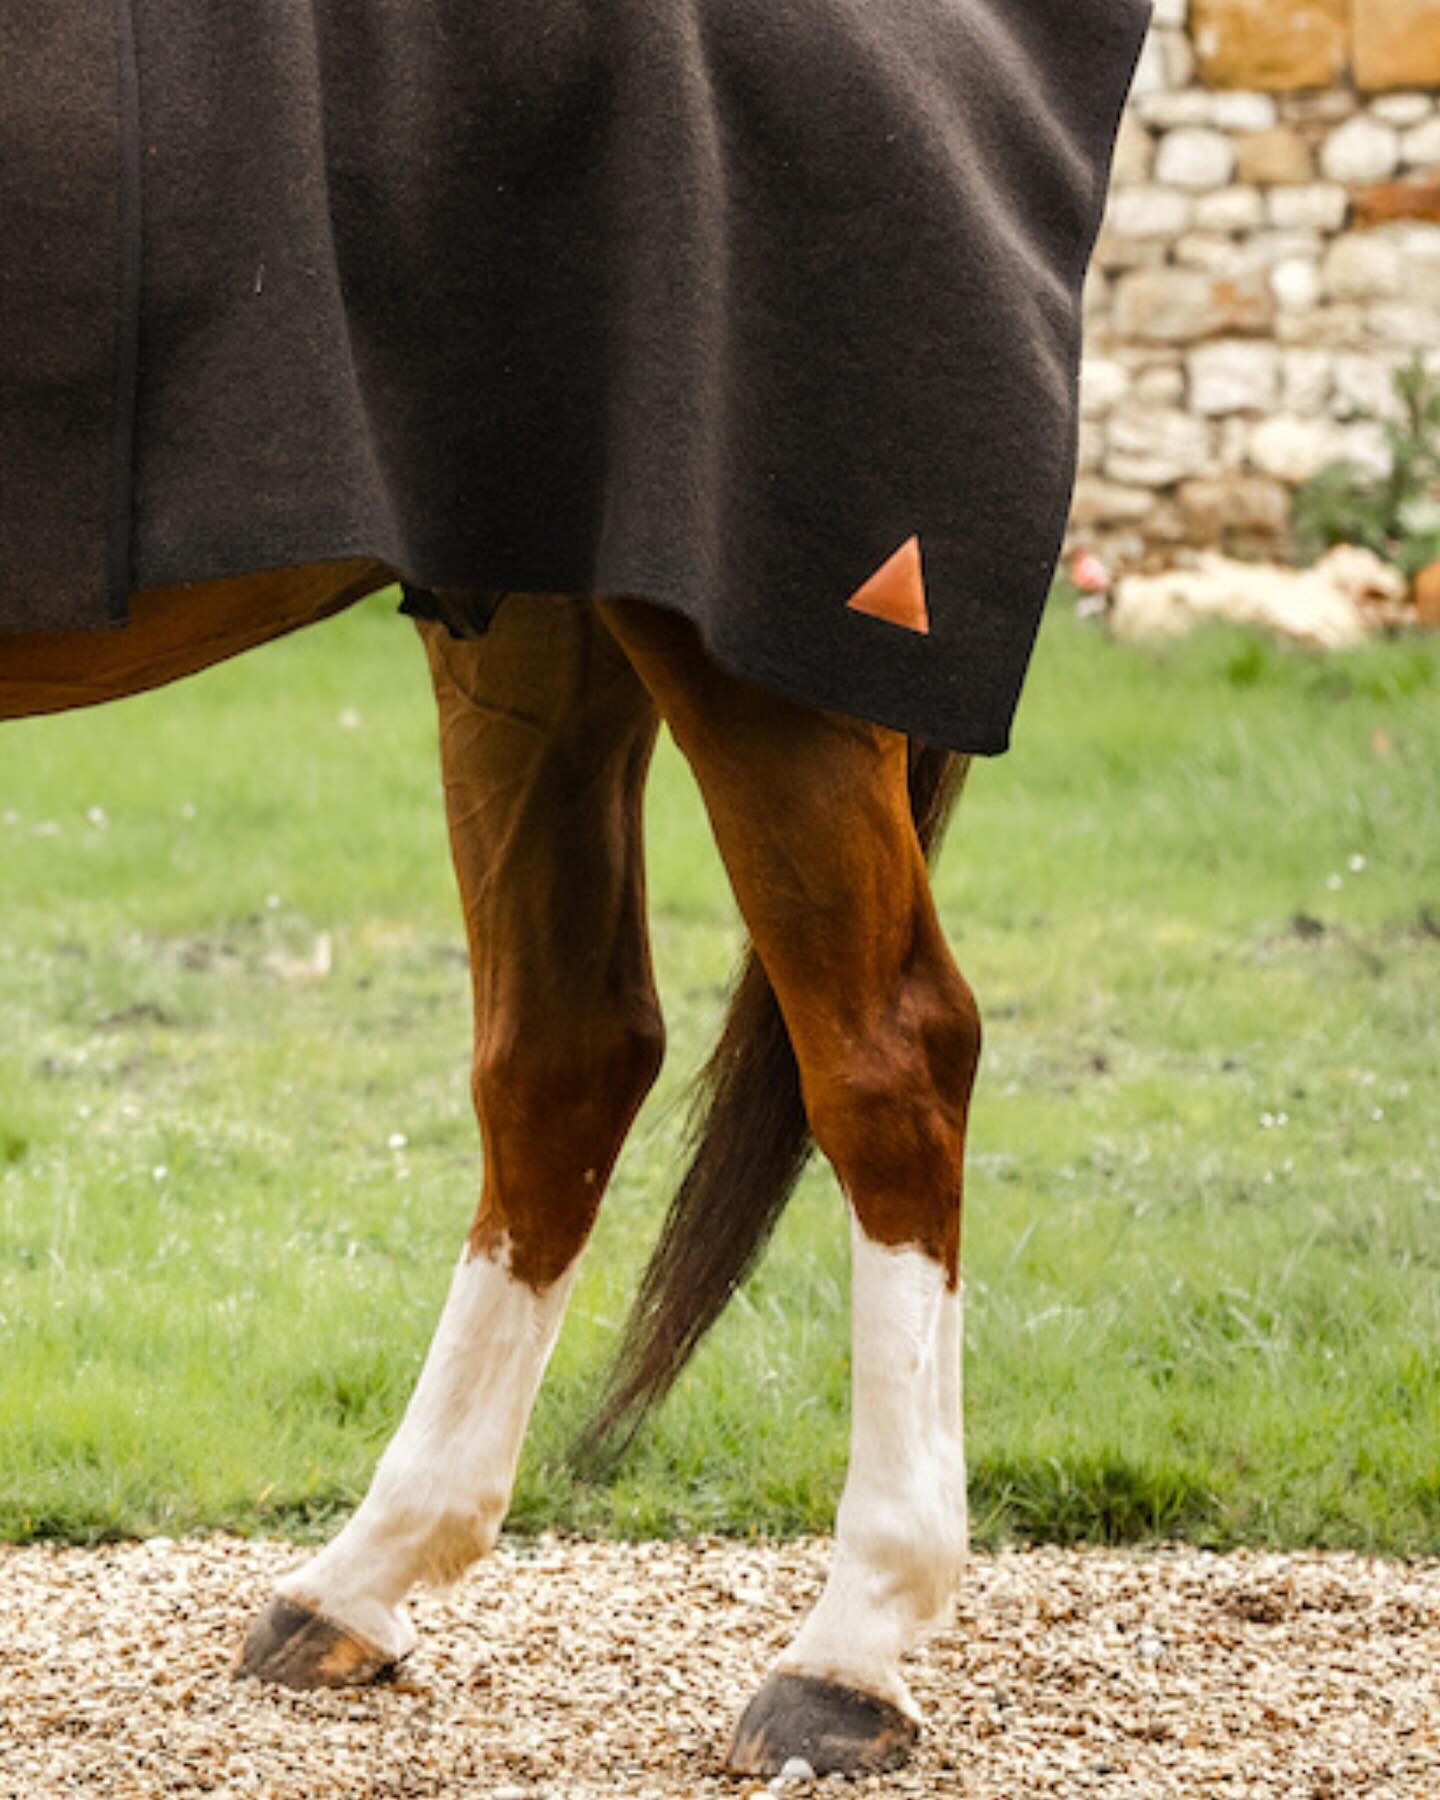 Une petite laine? 
//
#tacante #madeinfrance #ecoresponsable #laine #wool #carredelaine #couverture #couvrereins #horserugs #exerciserug #equestrianstyle #ecoresponsable♻️